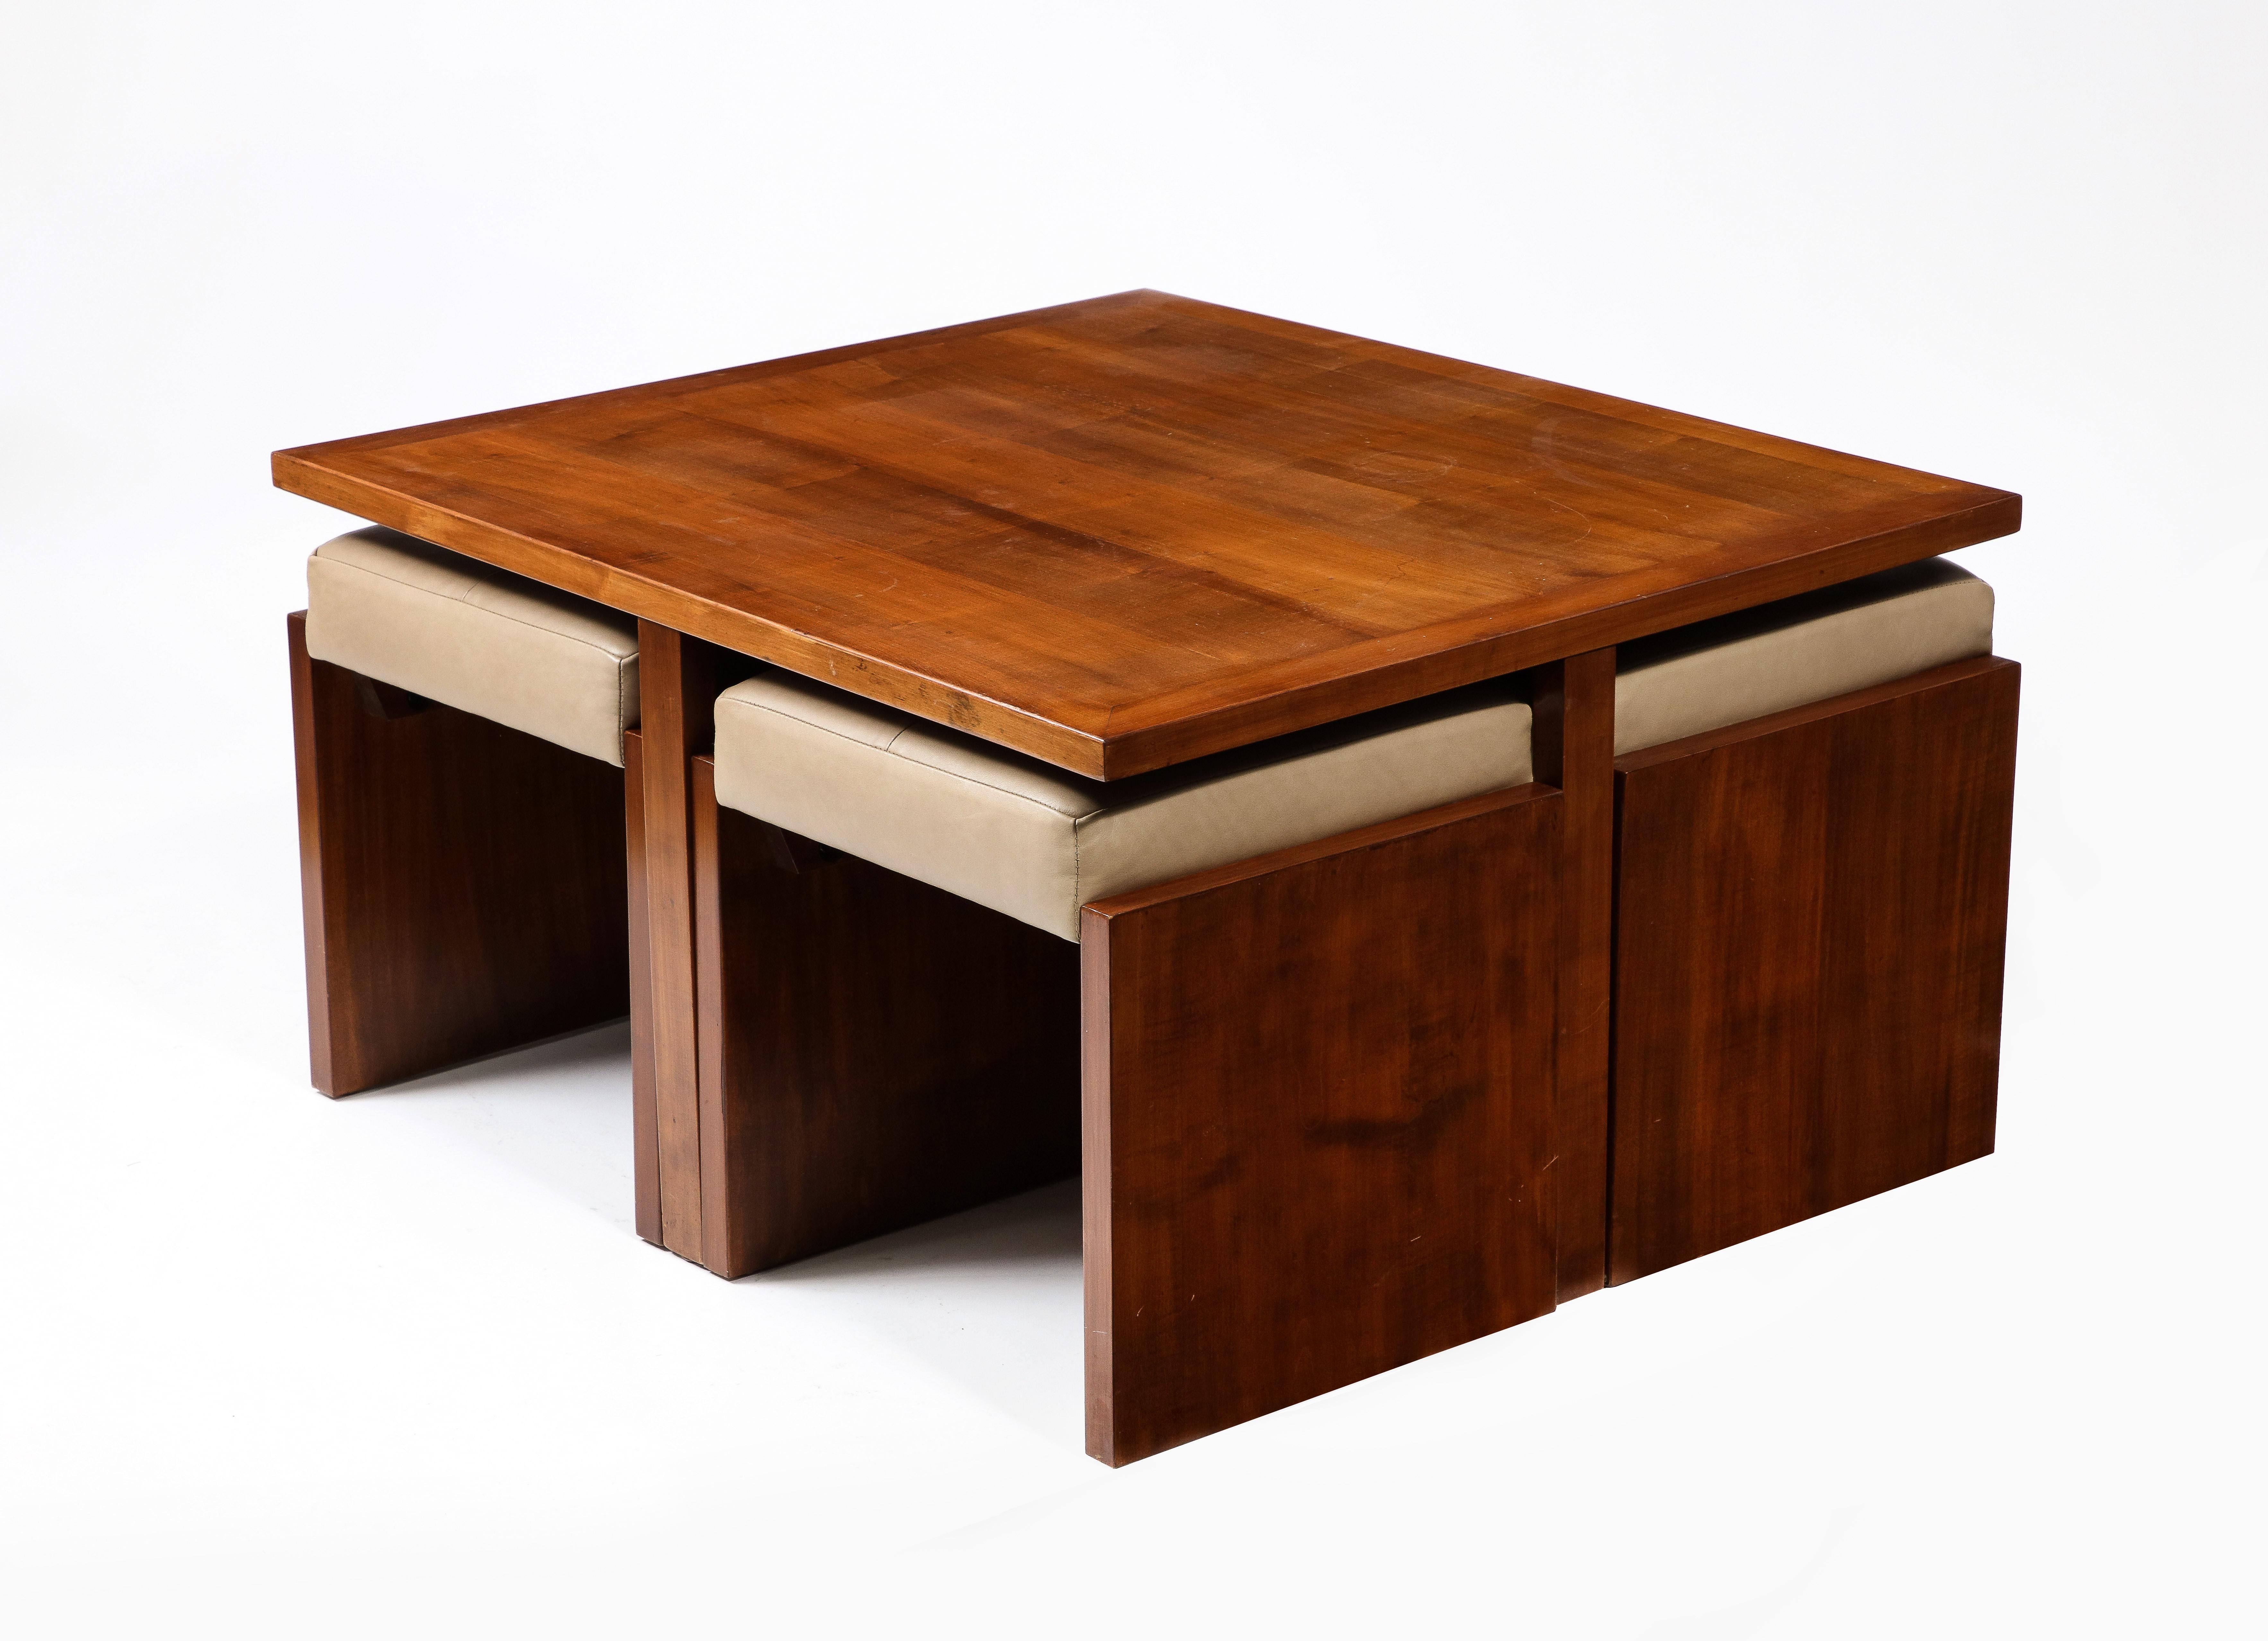 20th Century Square Walnut Coffee Table with Four Nesting Upholstered Stools, France 1940's For Sale